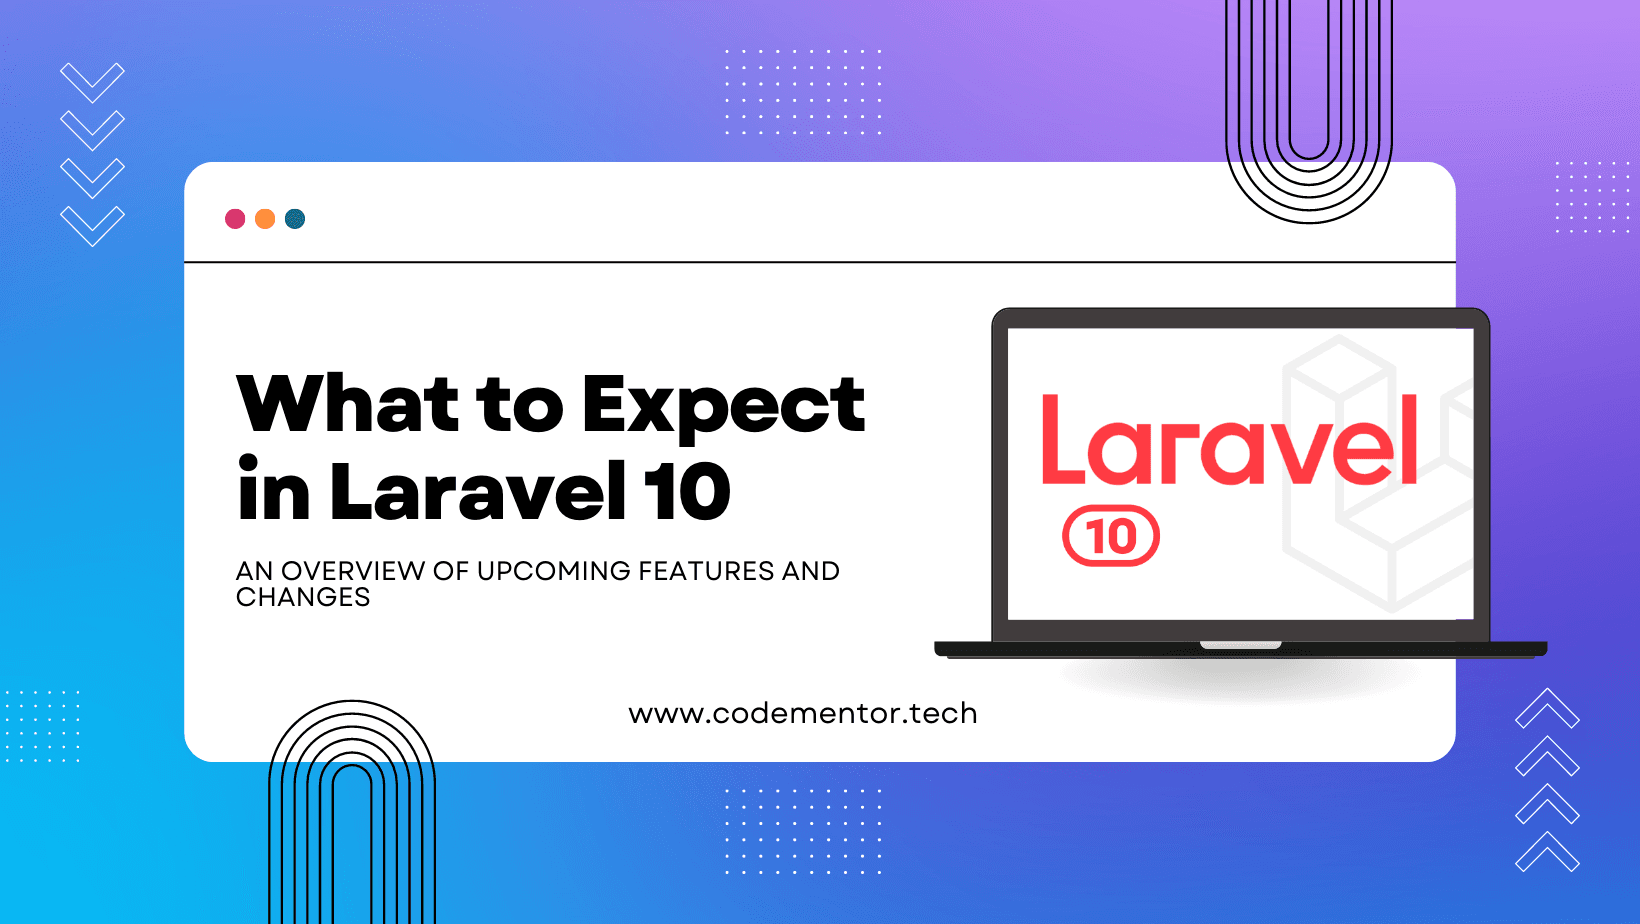 What to expect in laravel 10: An overview of upcoming features and changes